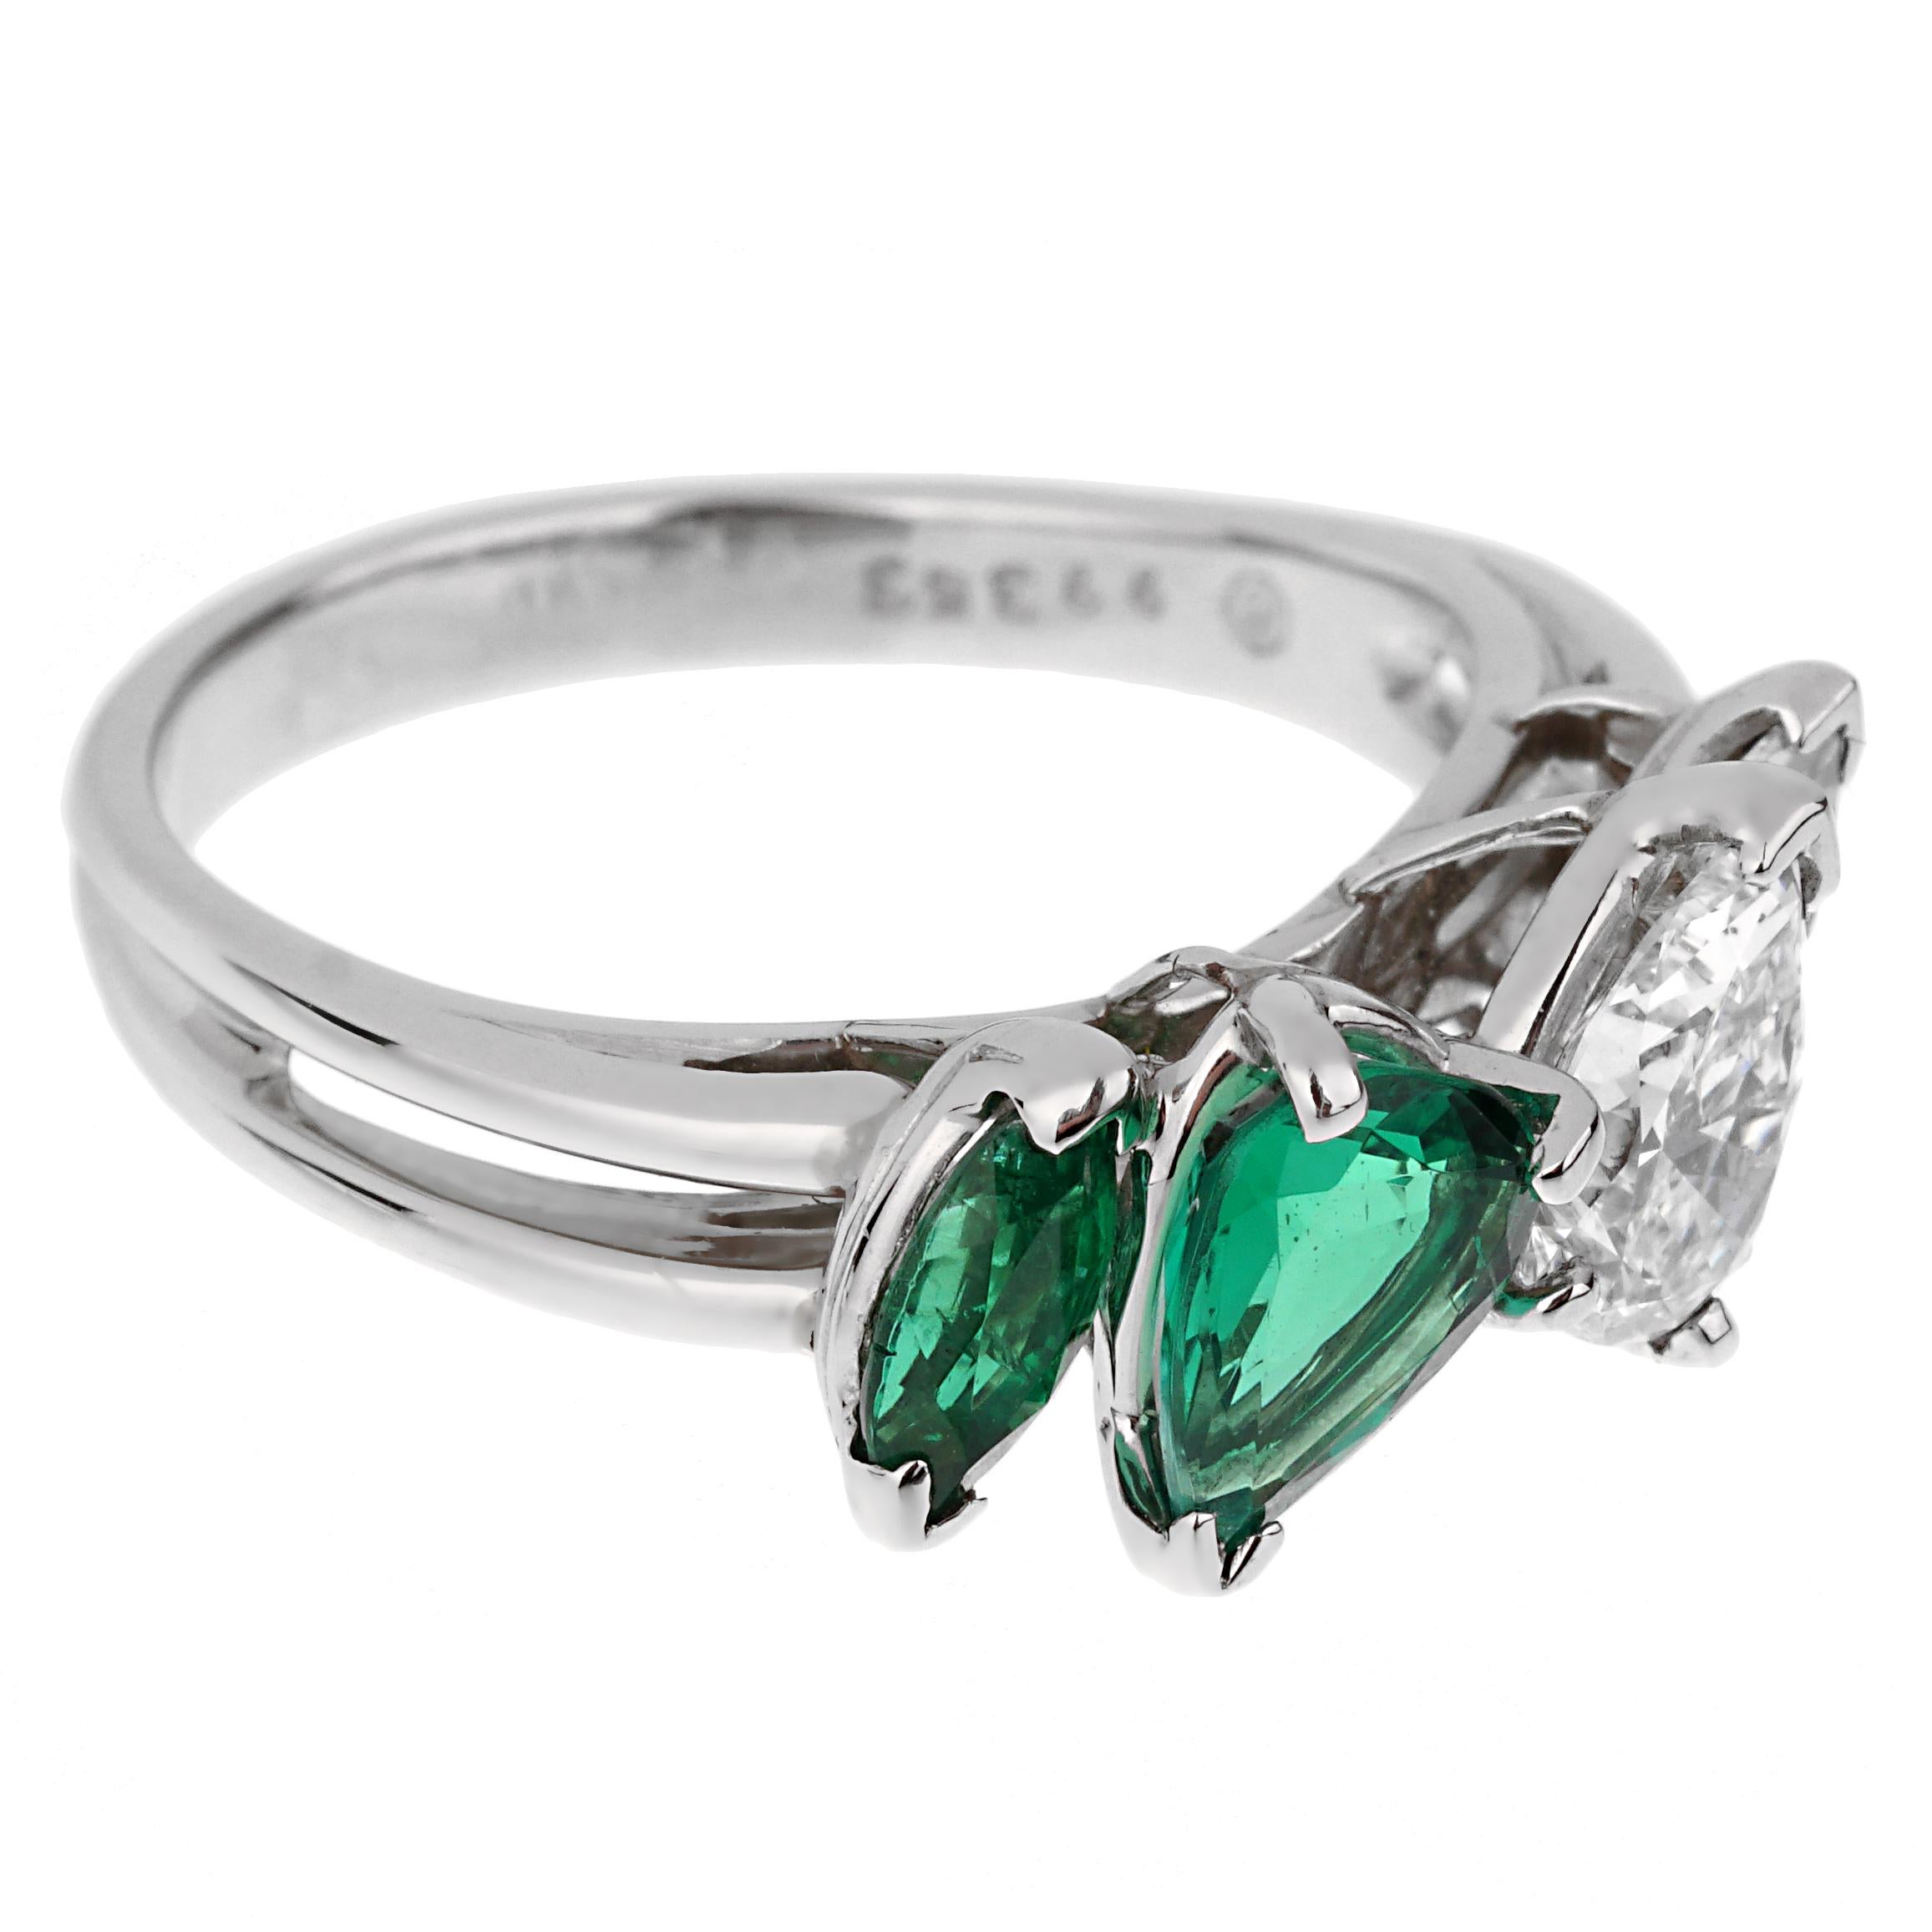 An incredible Oscar Heyman cocktail ring showcasing a 2 rich natural emeralds, the pear shaped GIA graded emerald measures .66ct and a .10ct marquise cut followed by a GIA certified D color VS1 pear shaped diamond, and a ,10ct marquise cut diamonds.